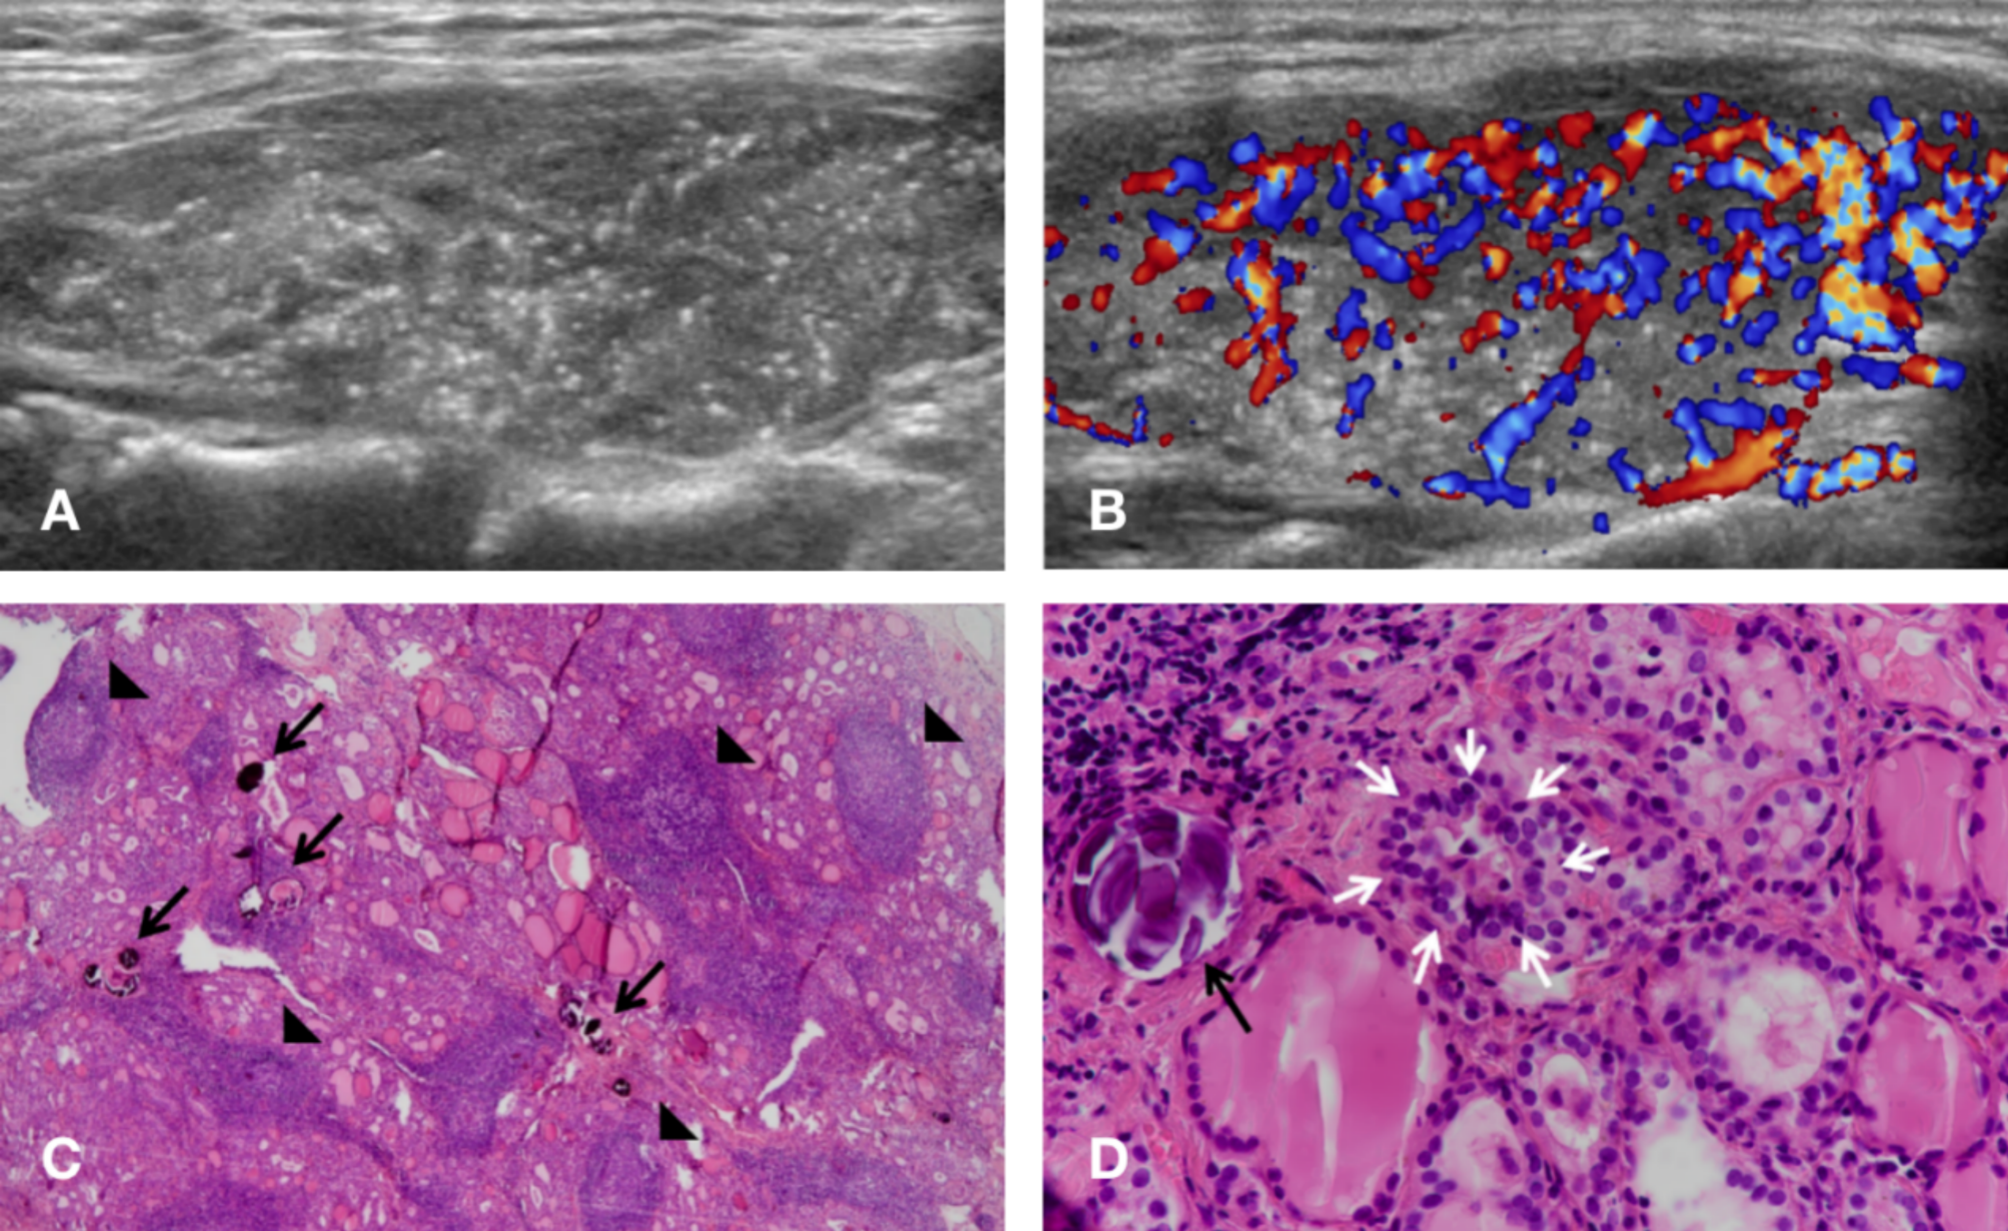 Sonographic characteristics of diffuse sclerosing variant of papillary thyroid carcinoma with histopathological correlation: a preliminary study